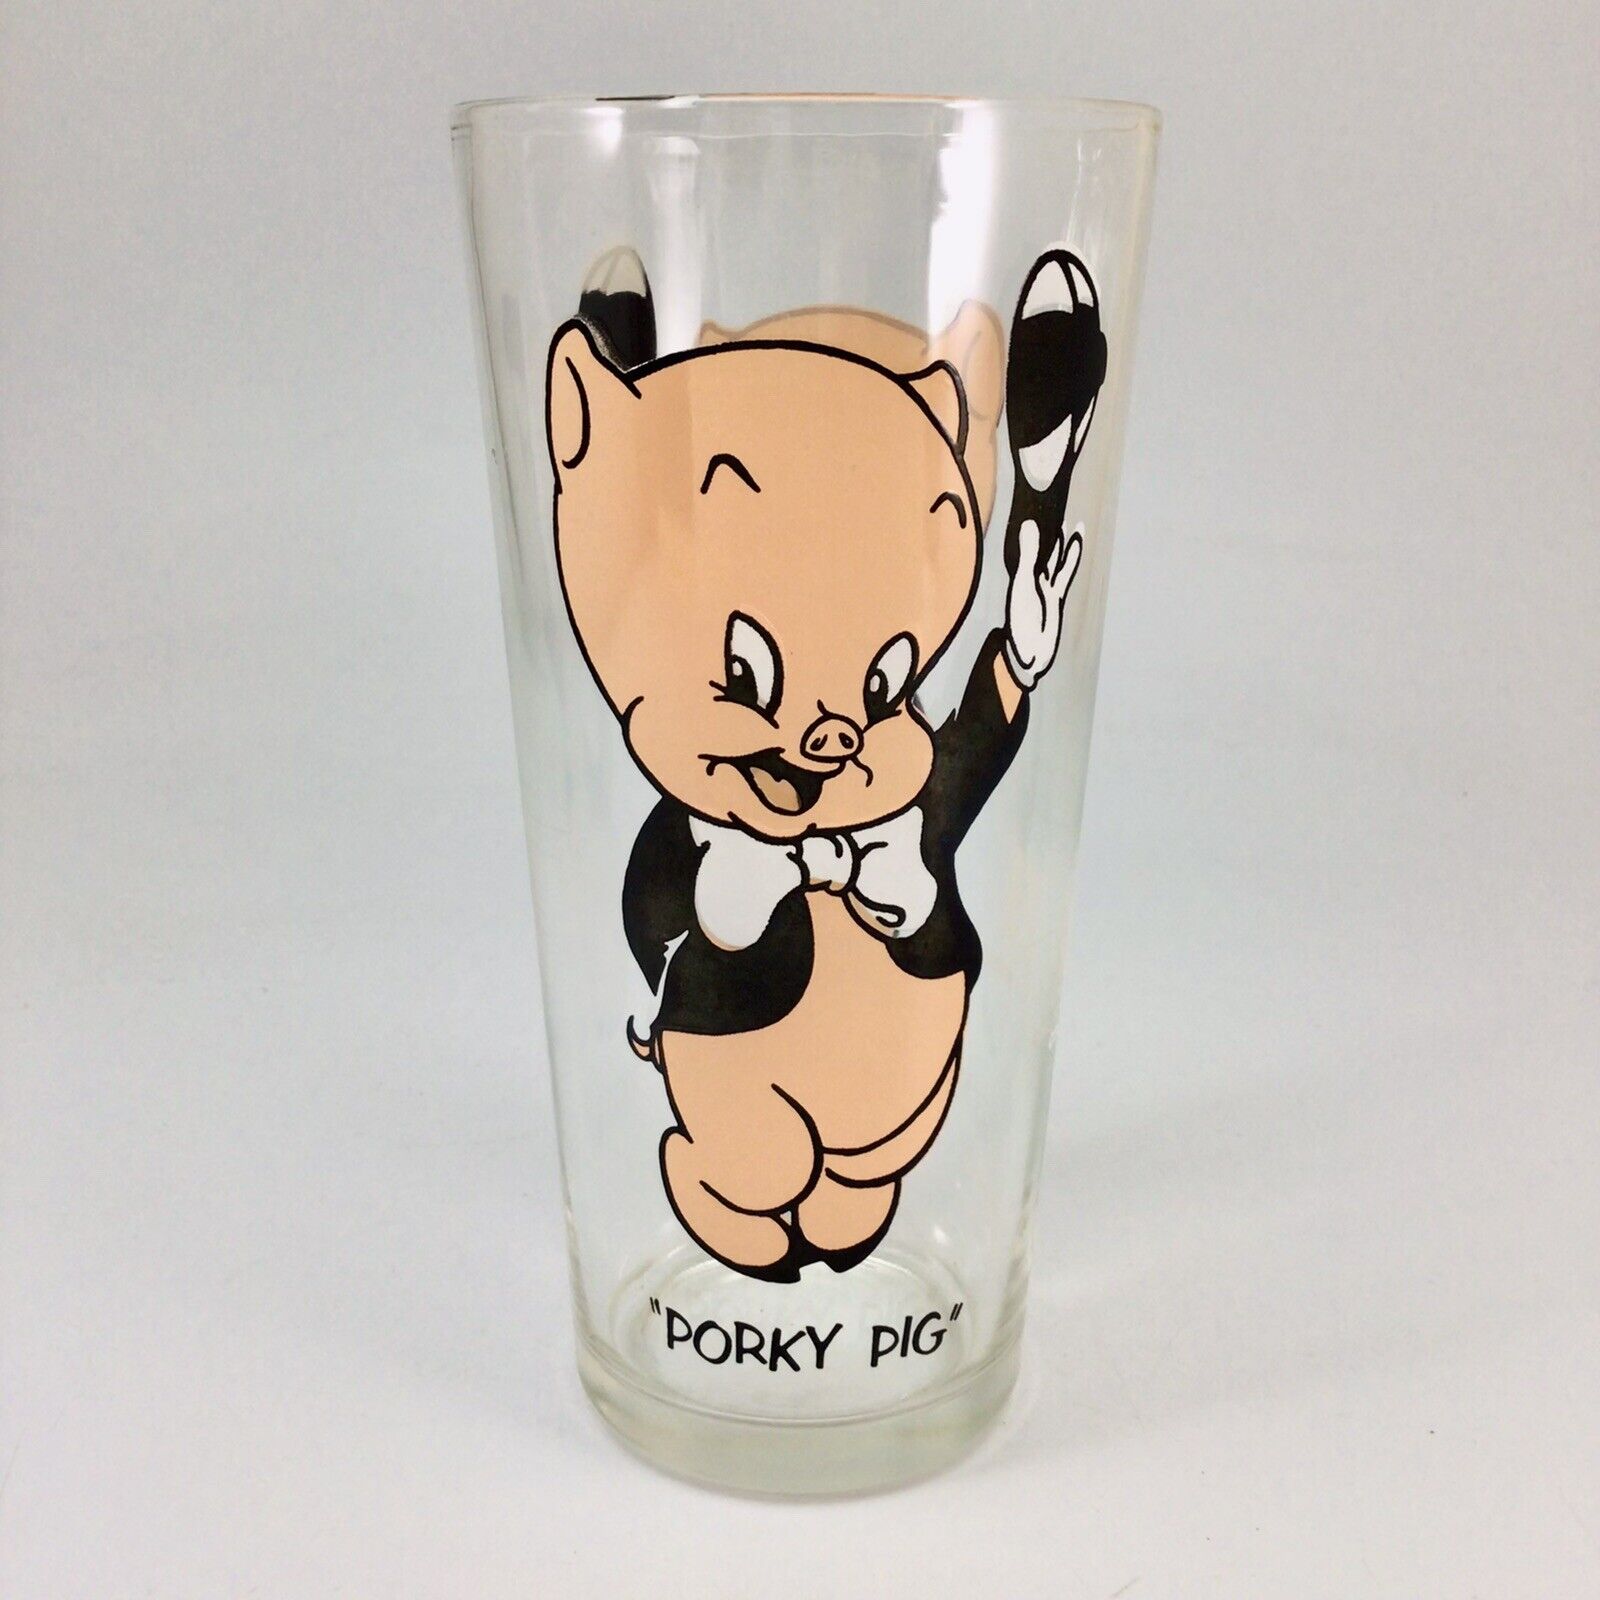 Looney Tunes Collectibles - Porky Pig Pepsi Collectors Series Glass